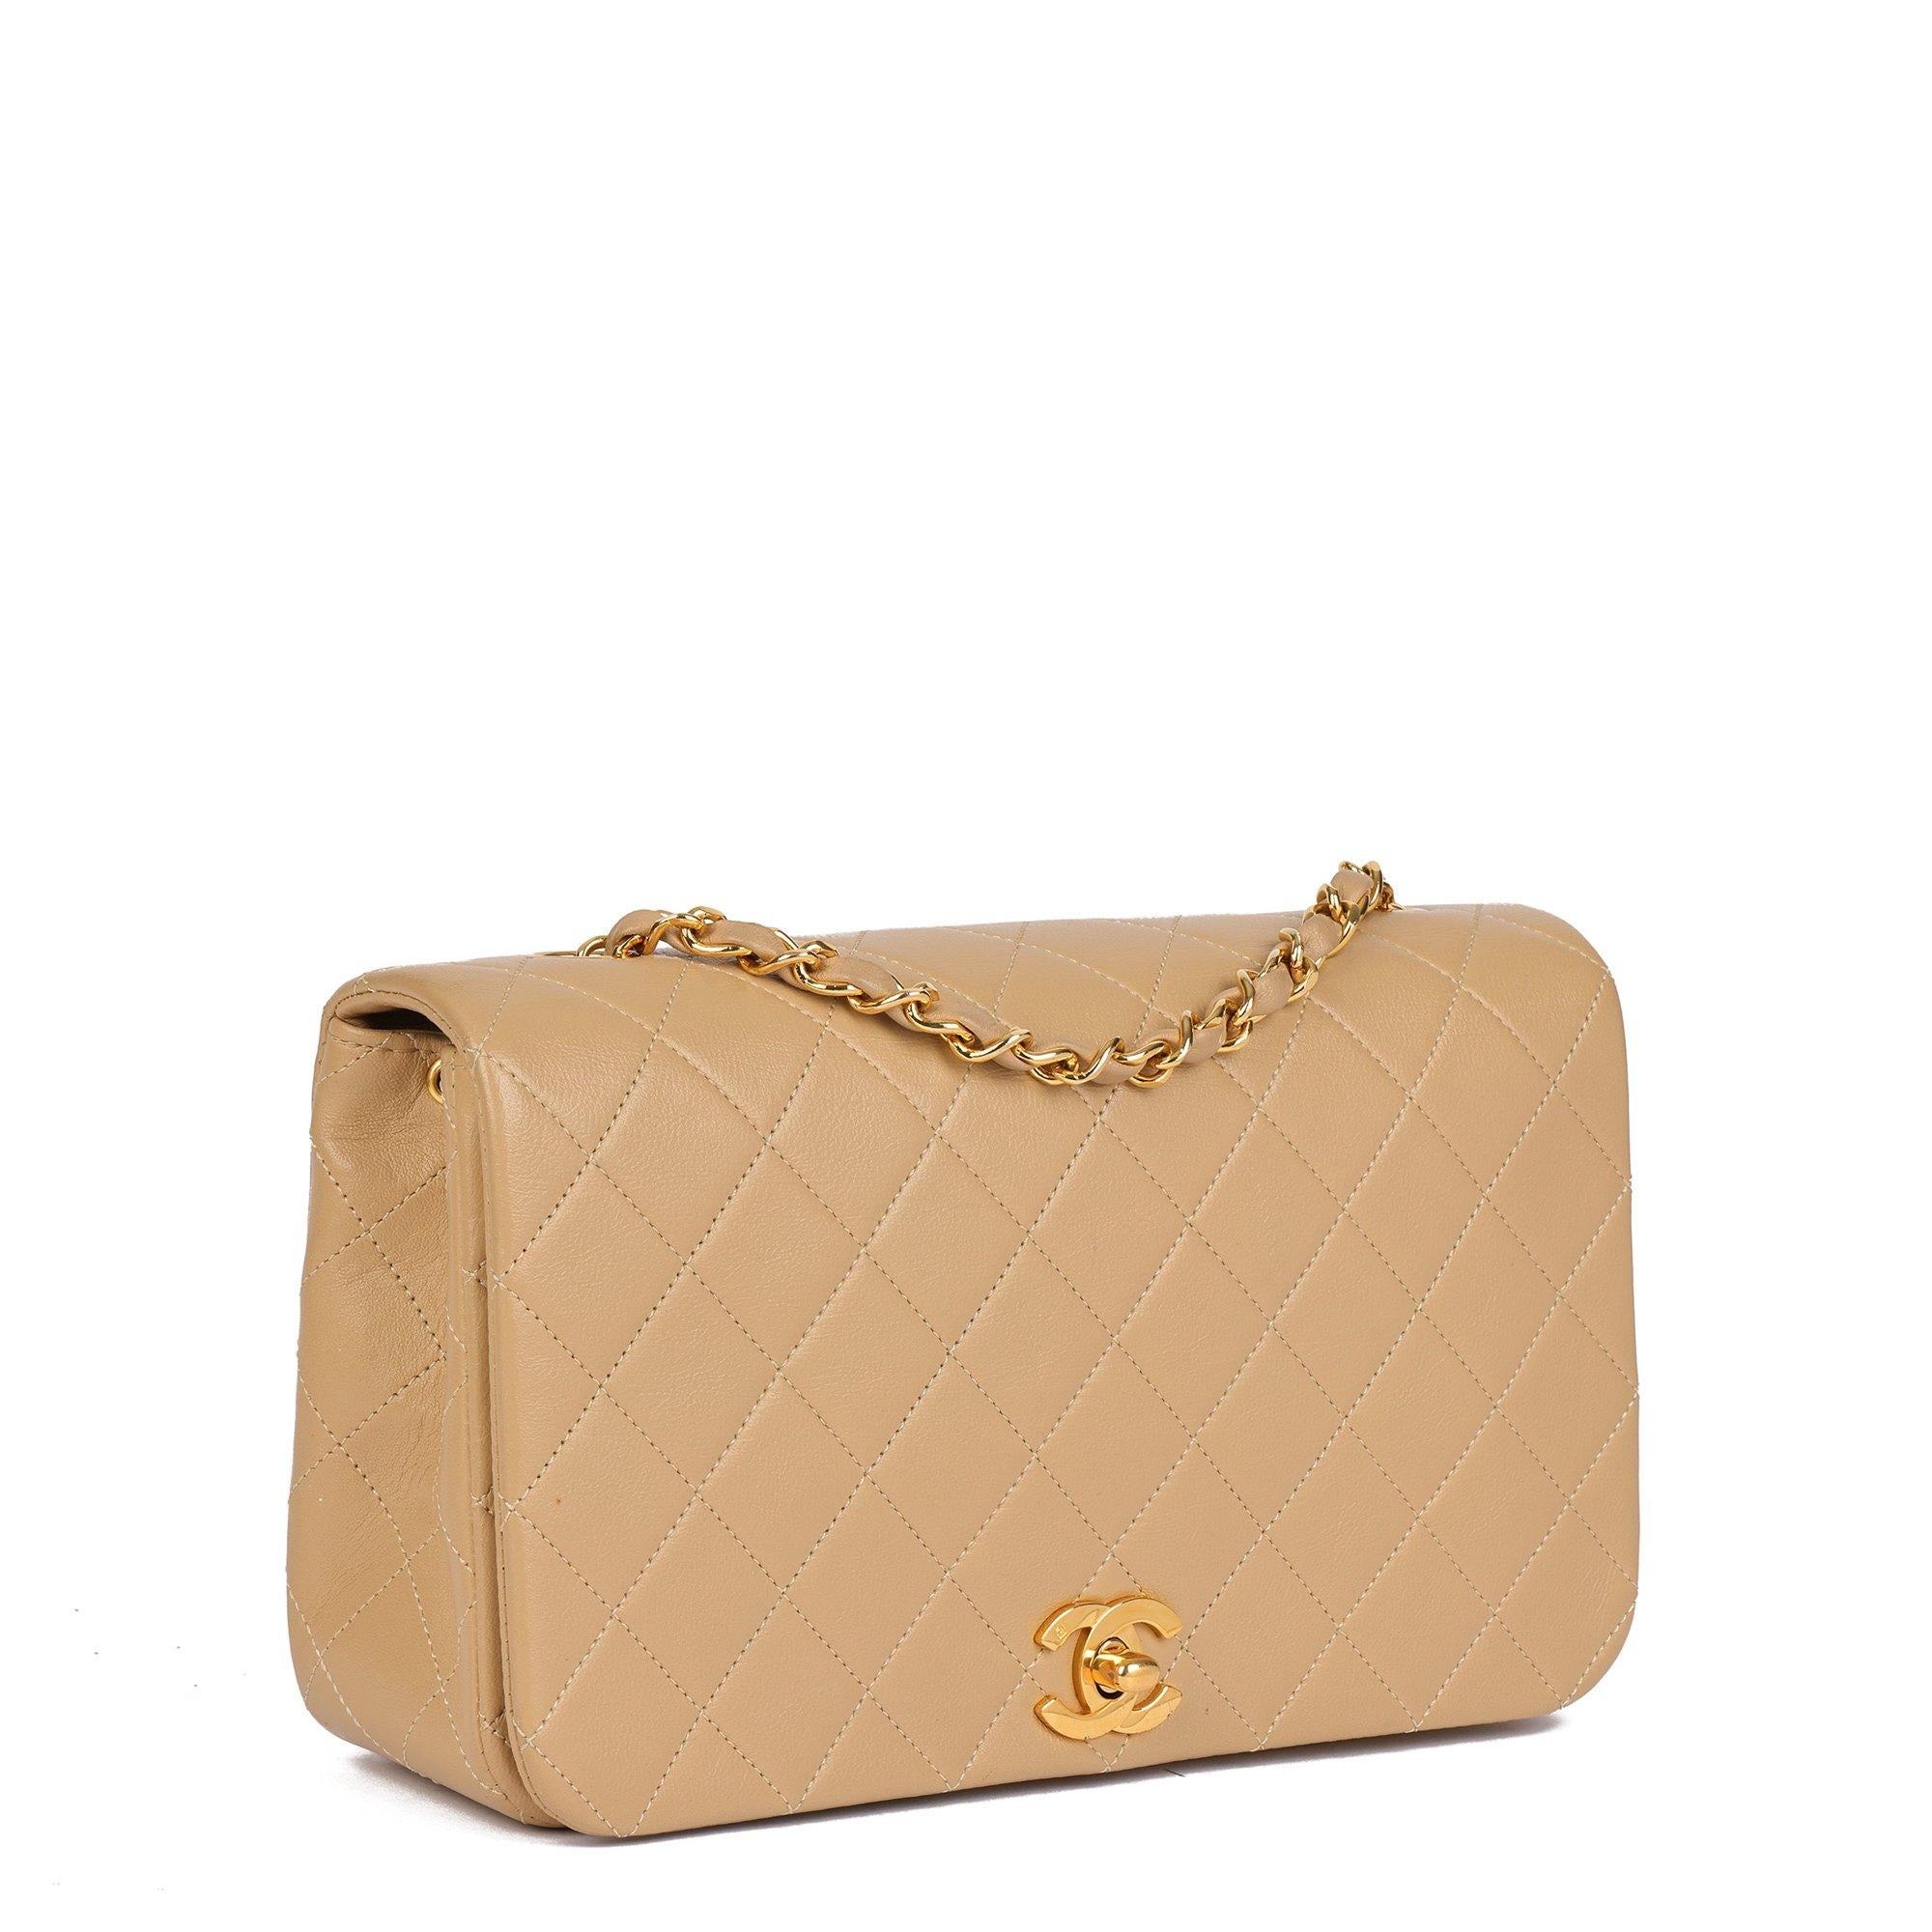 CHANEL Beige Quilted Lambskin Vintage Small Classic Single Full Flap Bag 9